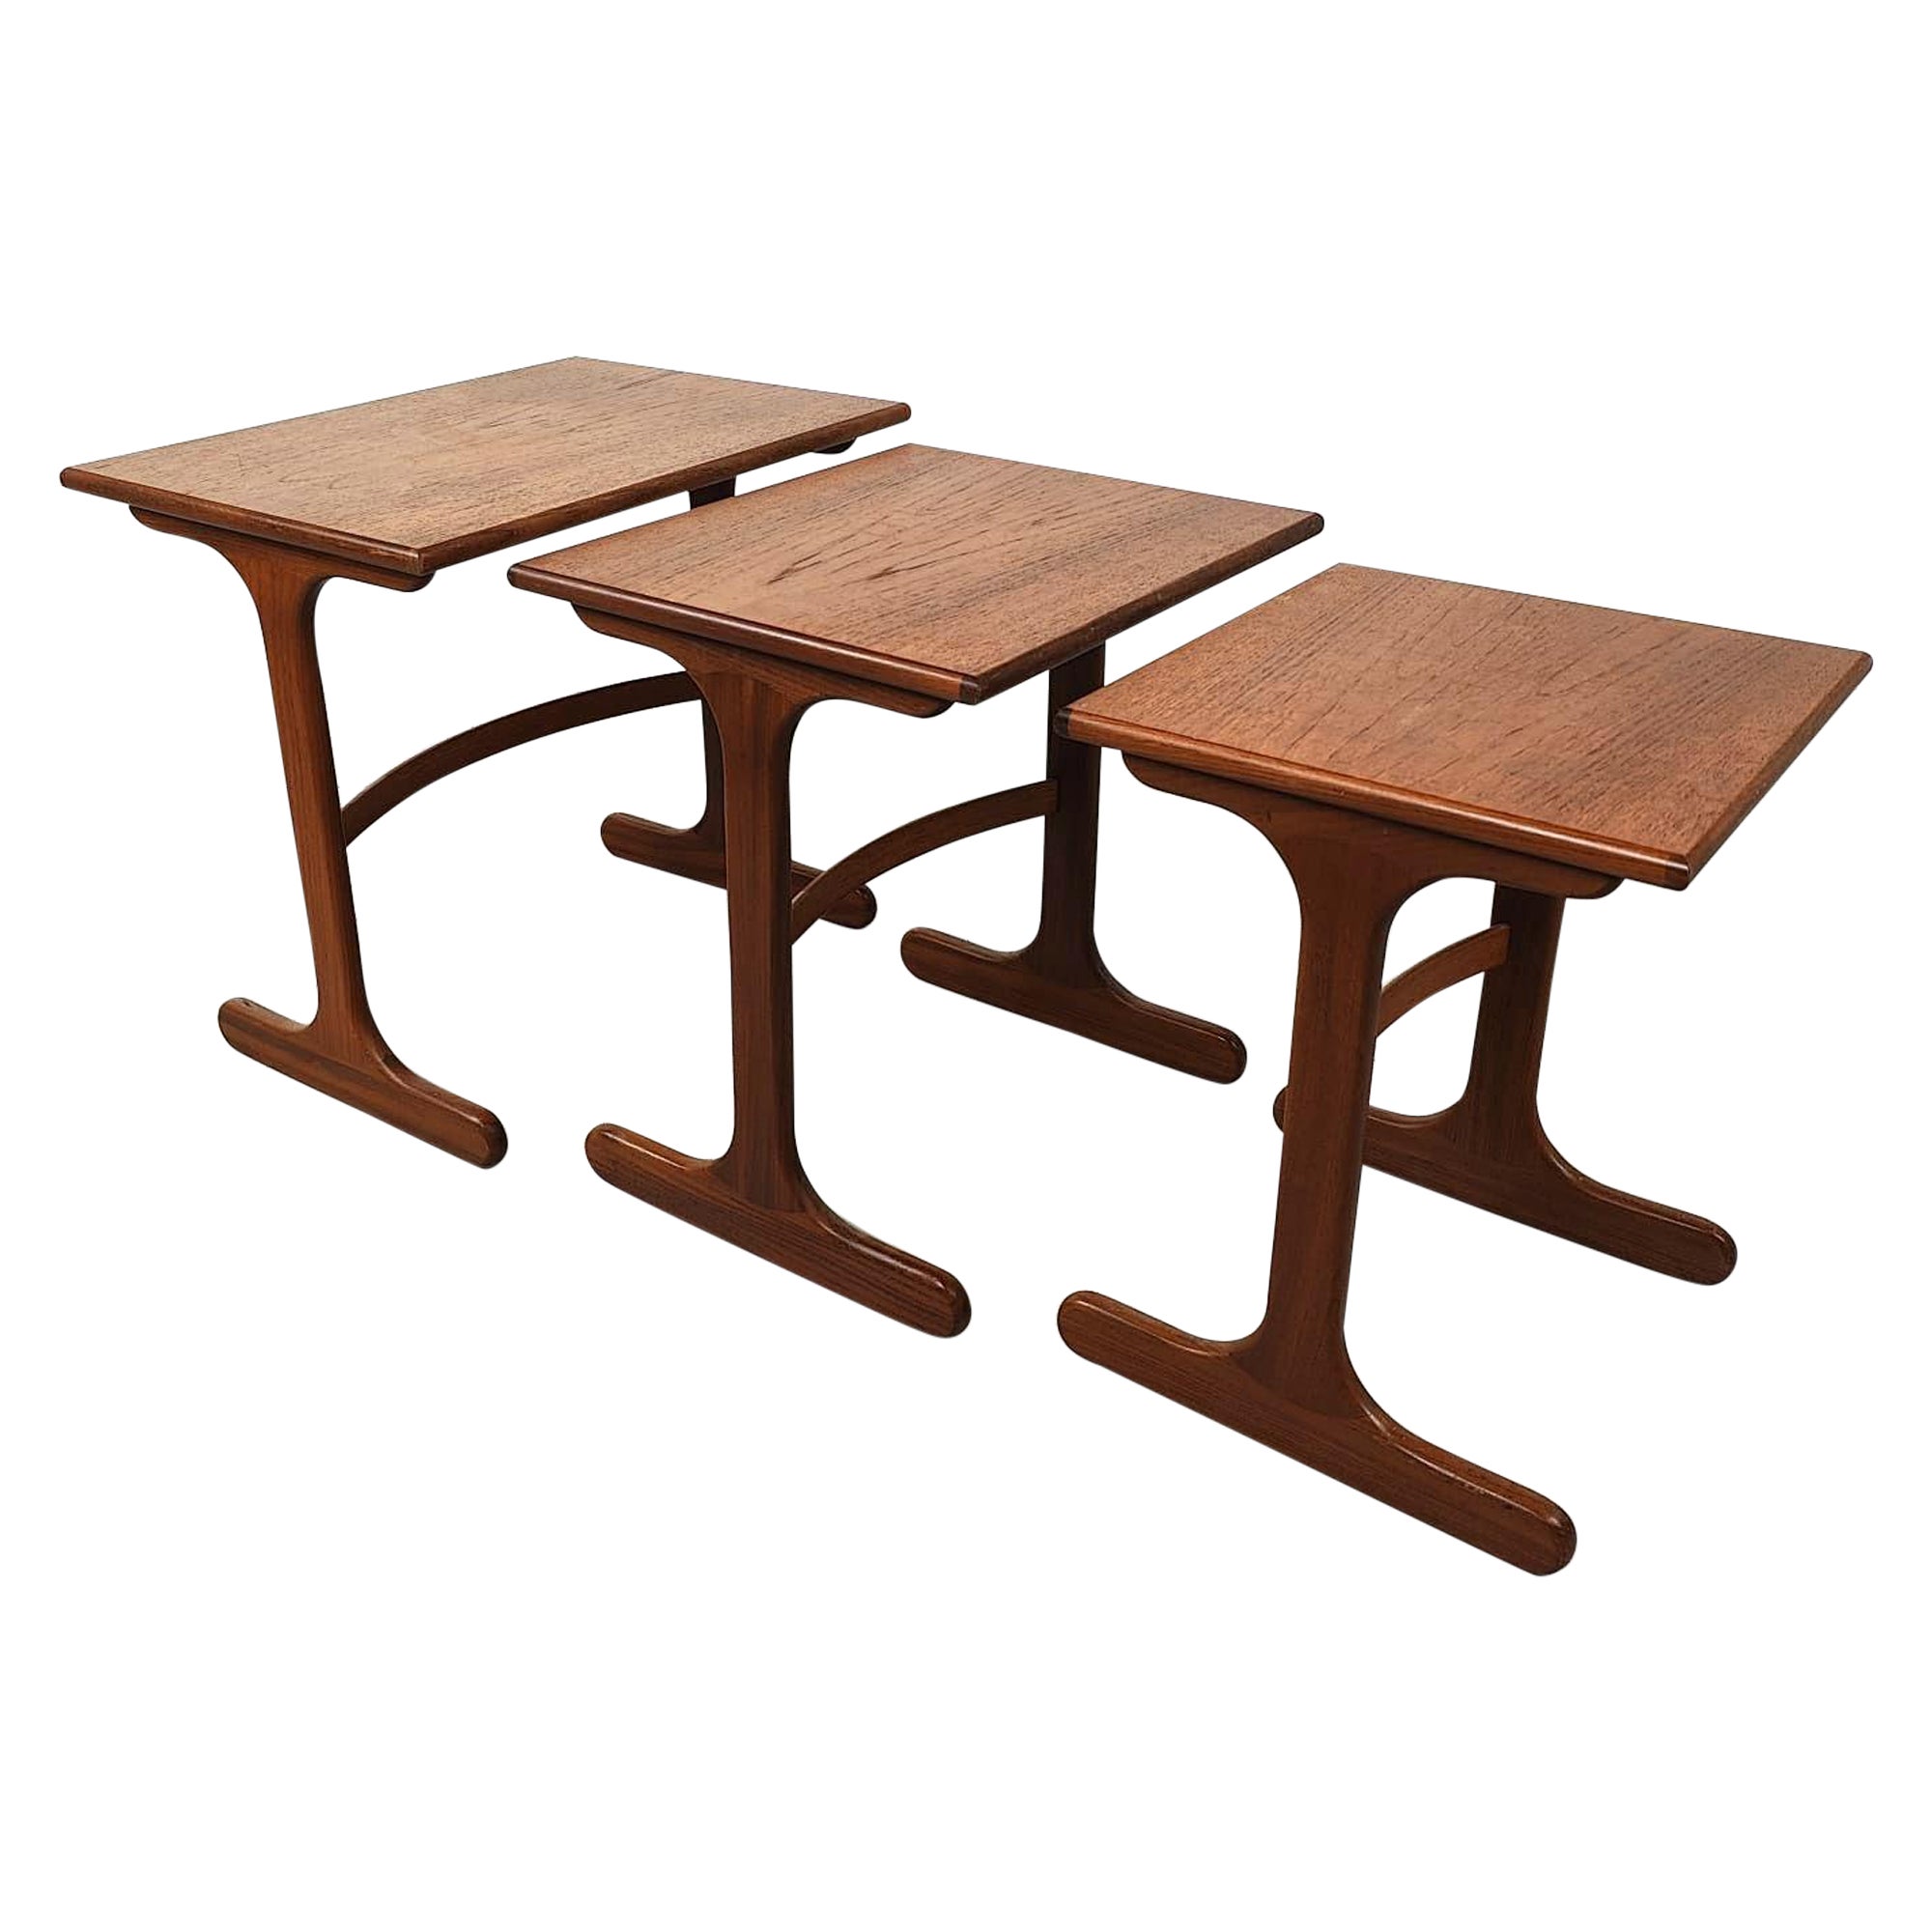 Set of nesting tables in teak by G-plan